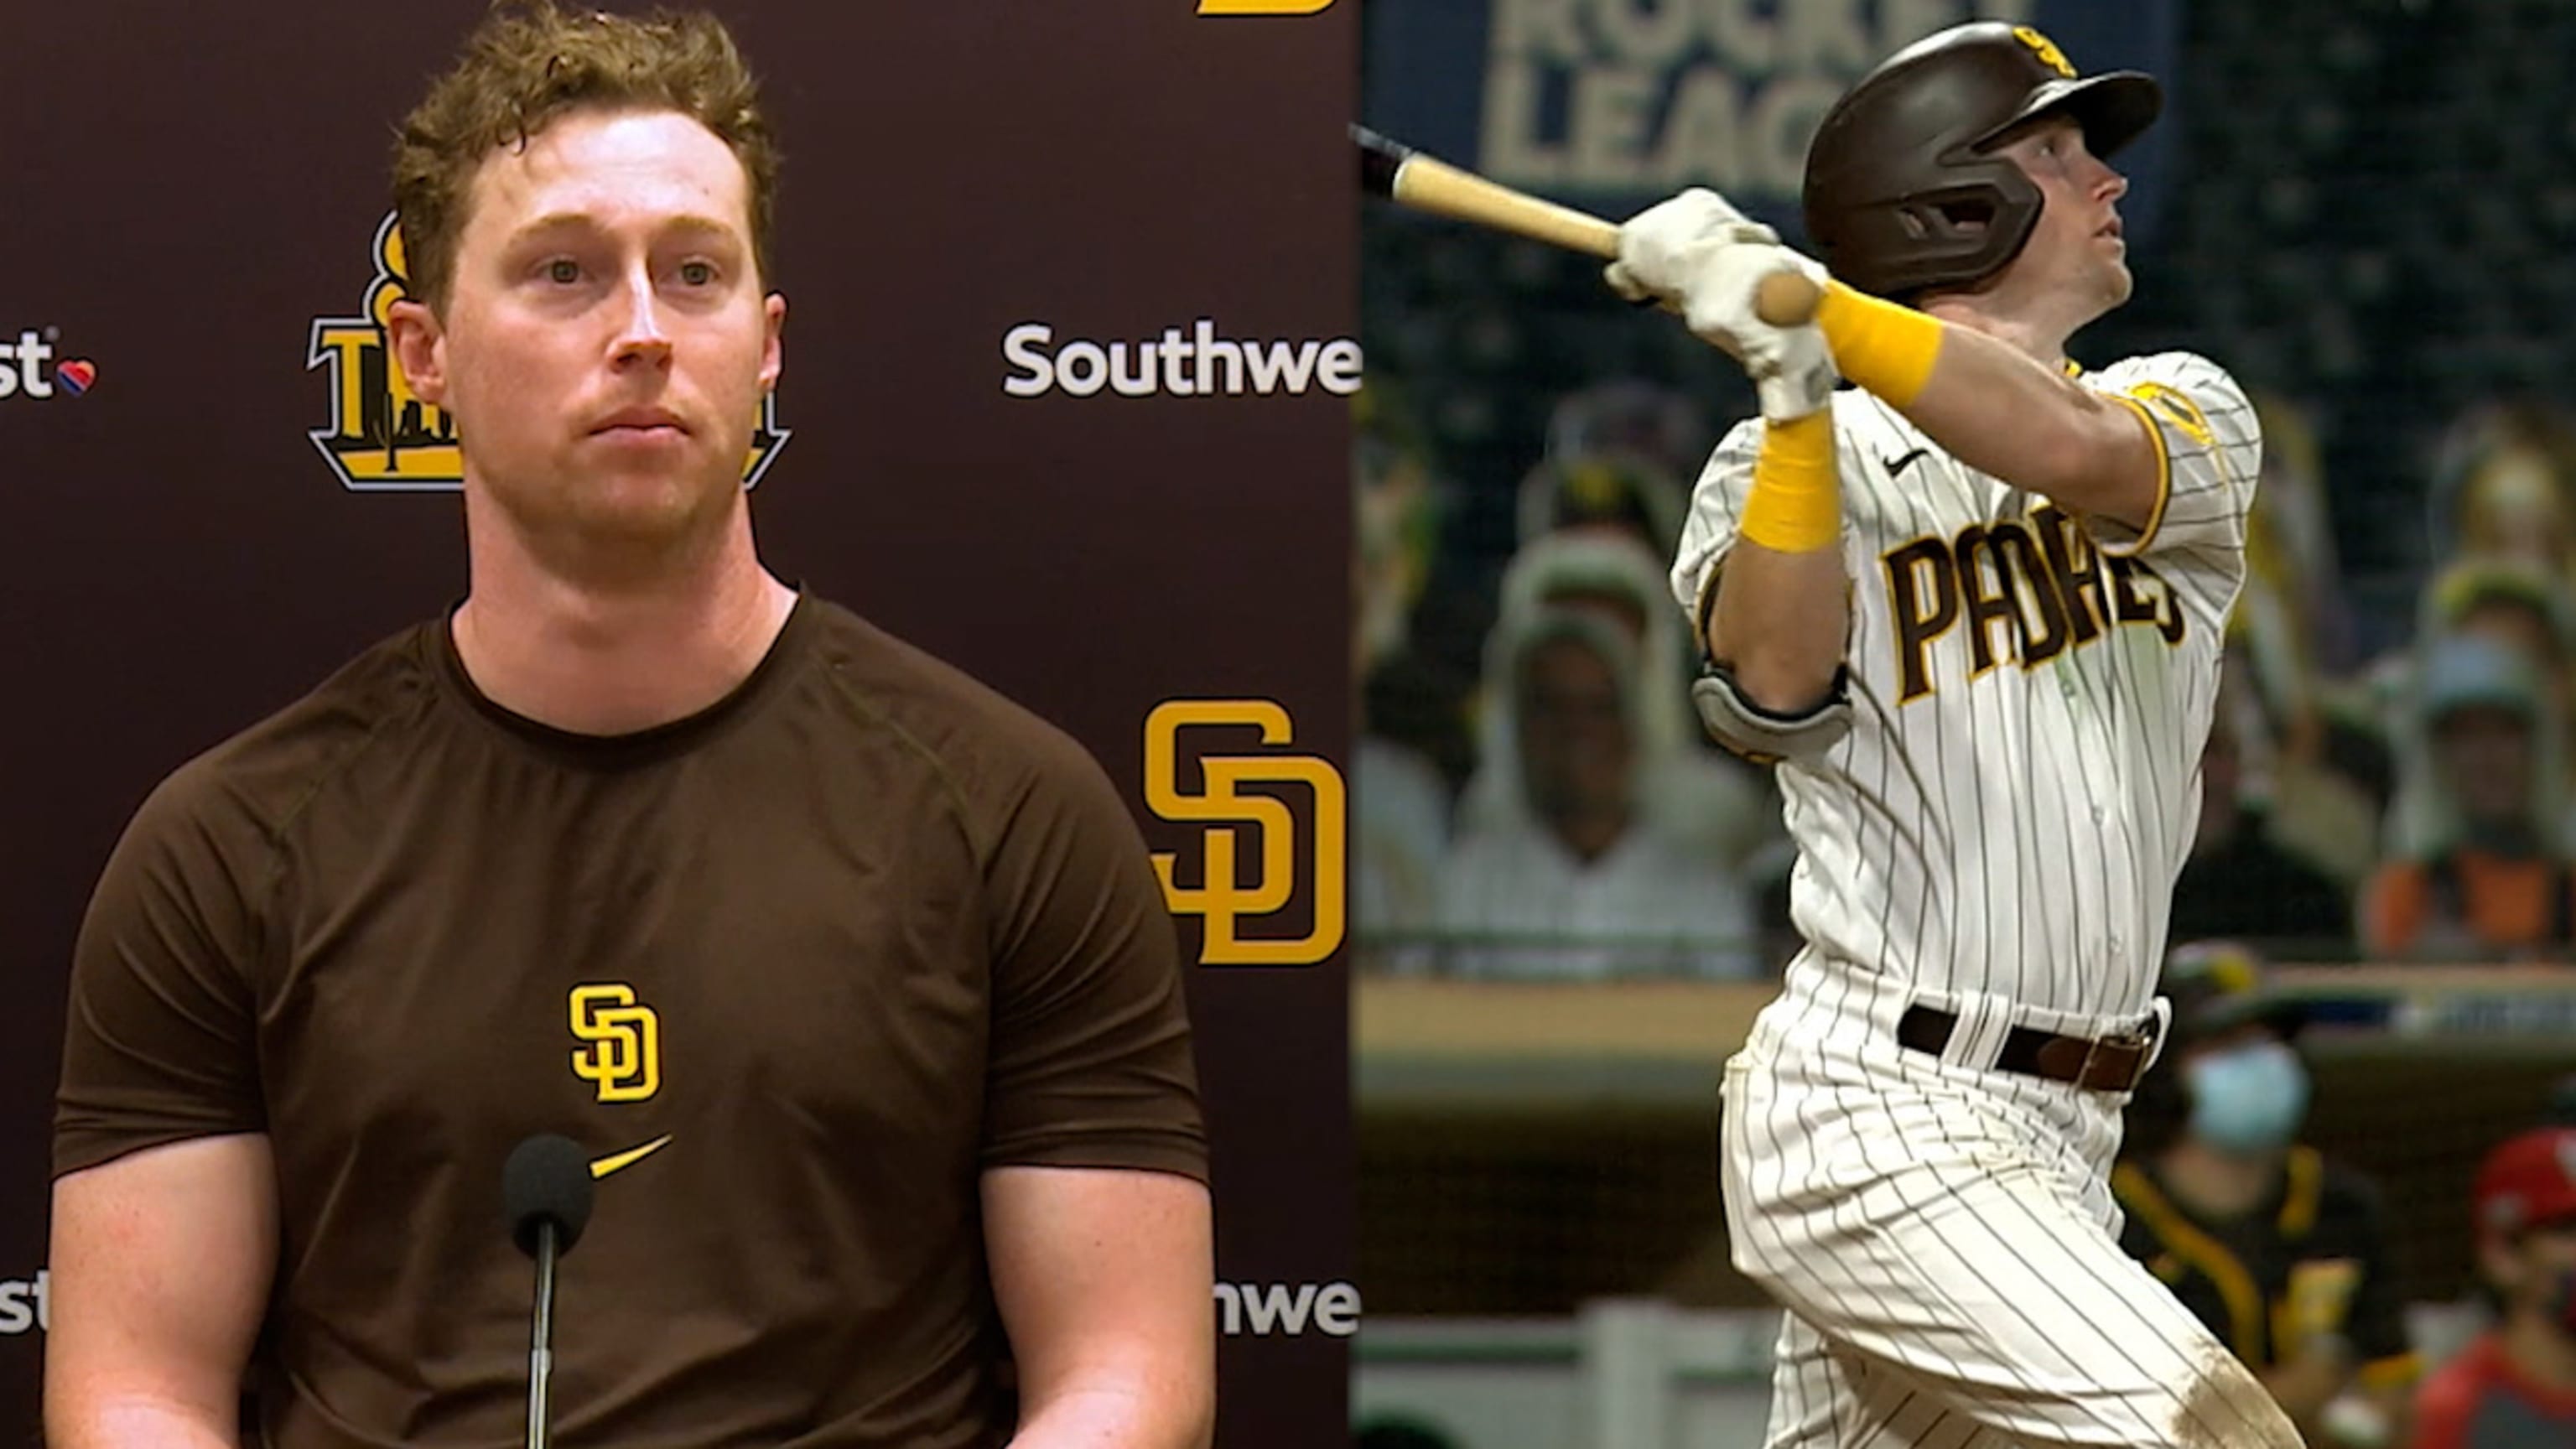 Big Brown Machine on X: Looking ahead to @padres Spring Training